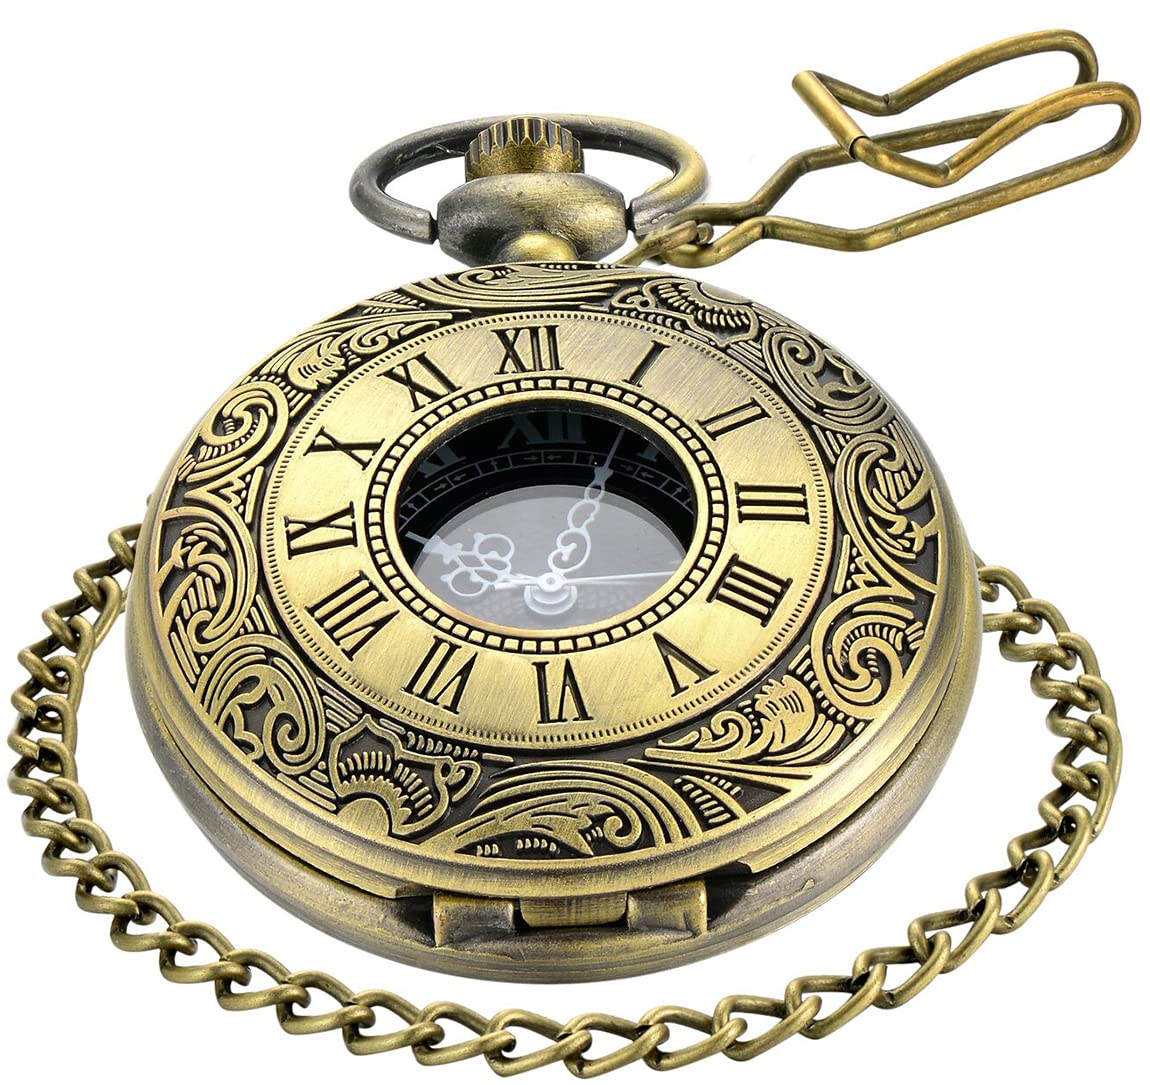 MJSCPHBJK Vintage Pocket Watch for Men Roman Numerals Scale Quartz Pocket Watches with Chain for Xmas Fathers Day Gift